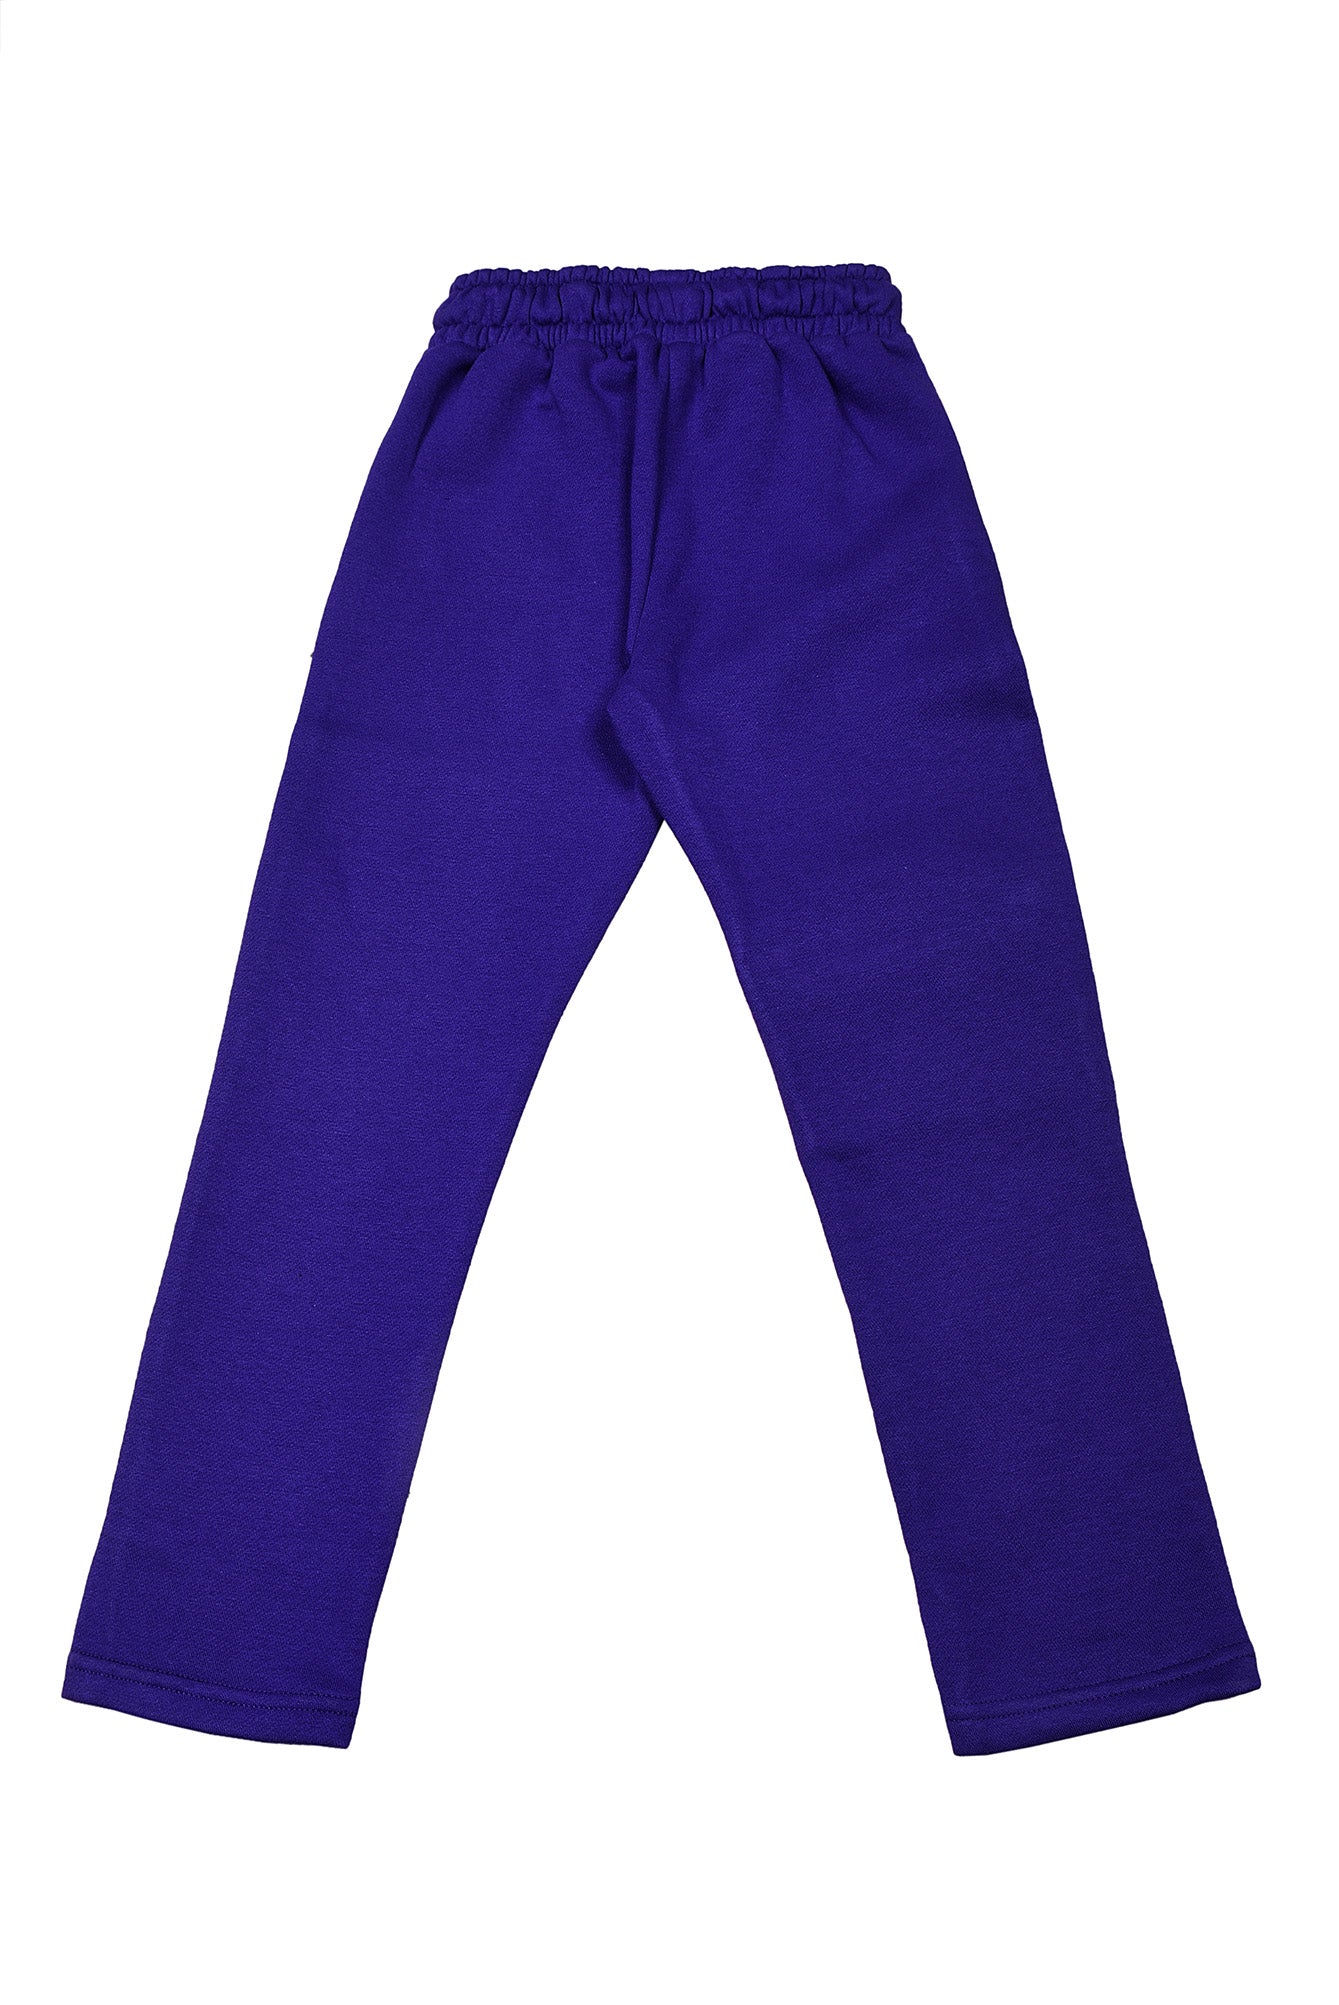 KDS-GC-13157 PULL ON TROUSER PURPLE